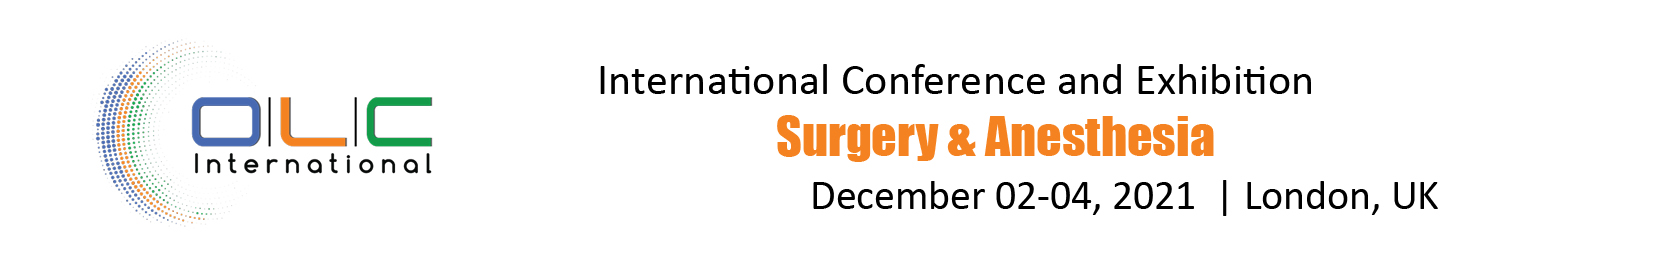 International Conference and Exhibition on Surgery & Anesthesia